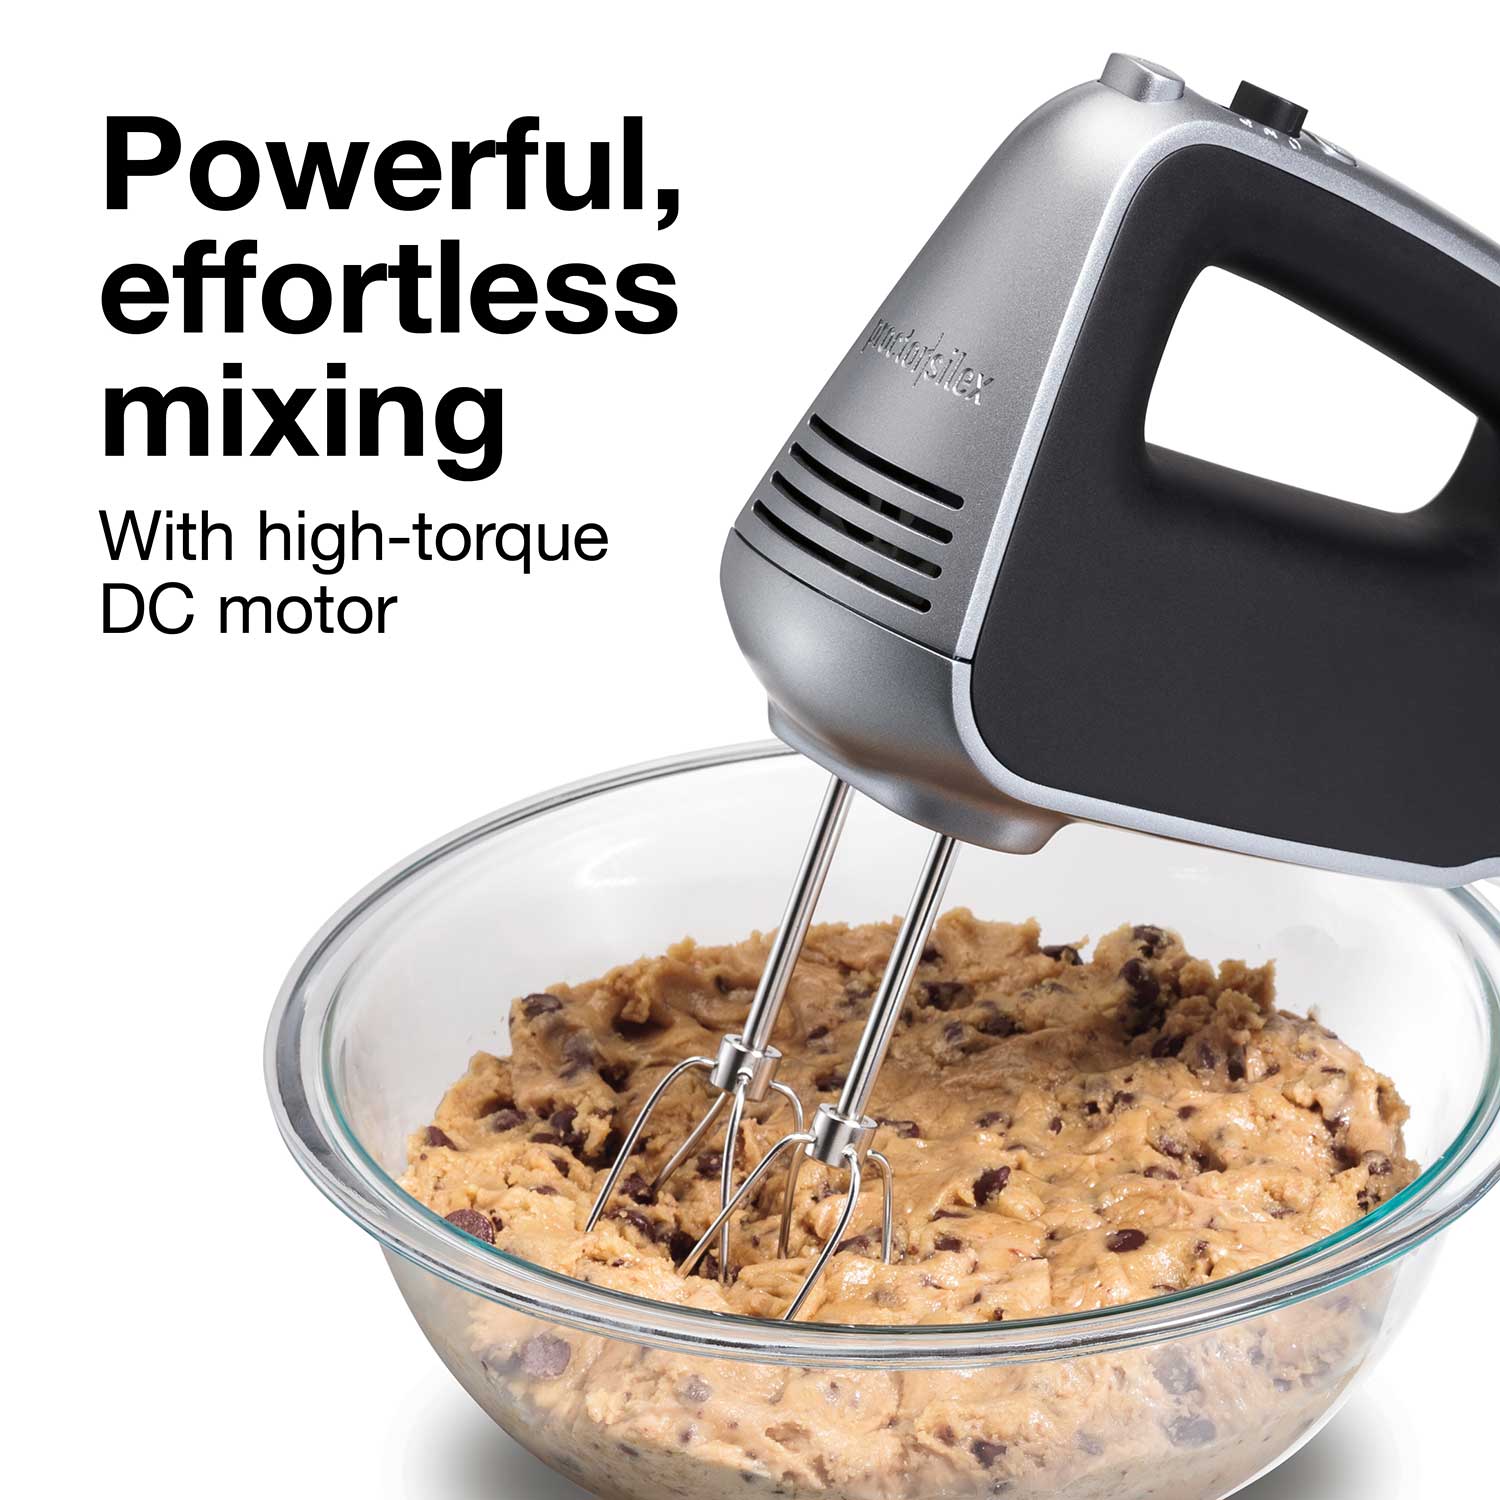 Proctor Silex 5-Speed Black and Silver Hand Mixer with Power Boost